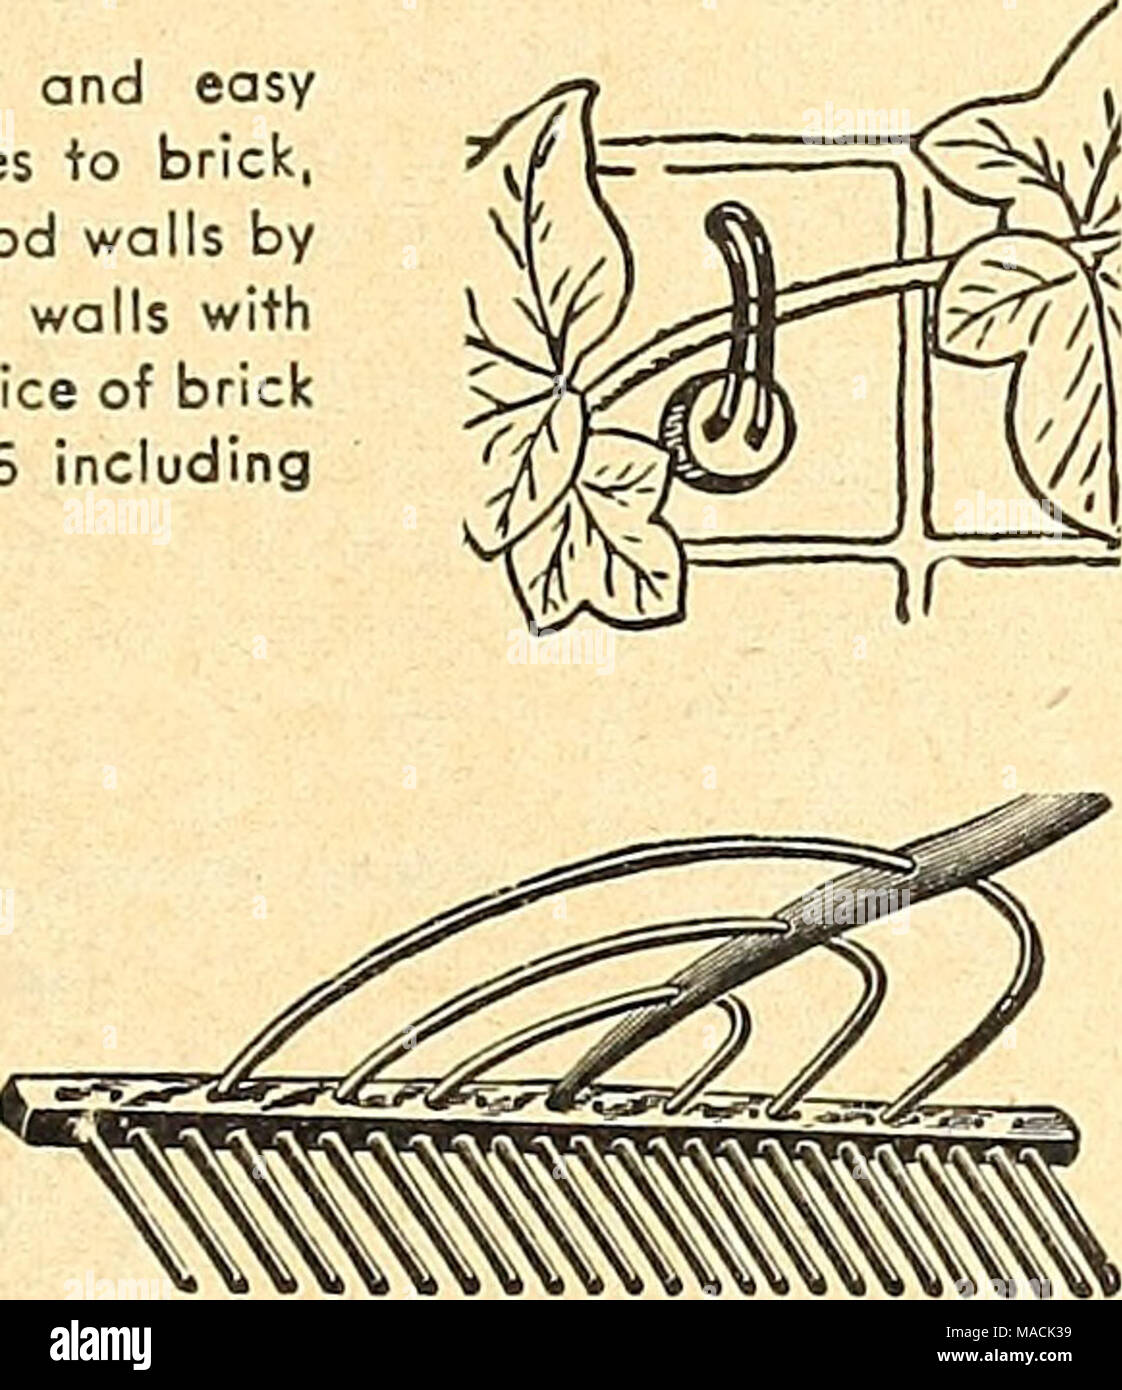 . Dreer's wholesale catalog for market gardeners and florists : 1944 winter - spring - summer . Rugg Wood Rake Disston Hand Pruning Saw Saws. Disston Hand Pruning. No. 7. 20-in. $2.00, postpaid. Pacific Coast Type Saw. #15 $2.25 postpaid. Pacific Coast Type Saw Pruning Saw, California Pattern #166. A popular type with taper- ground, cuived, steel blade and 8 point teeth cutting on the draw stroke. $1.95, postpaid. Stock Photo